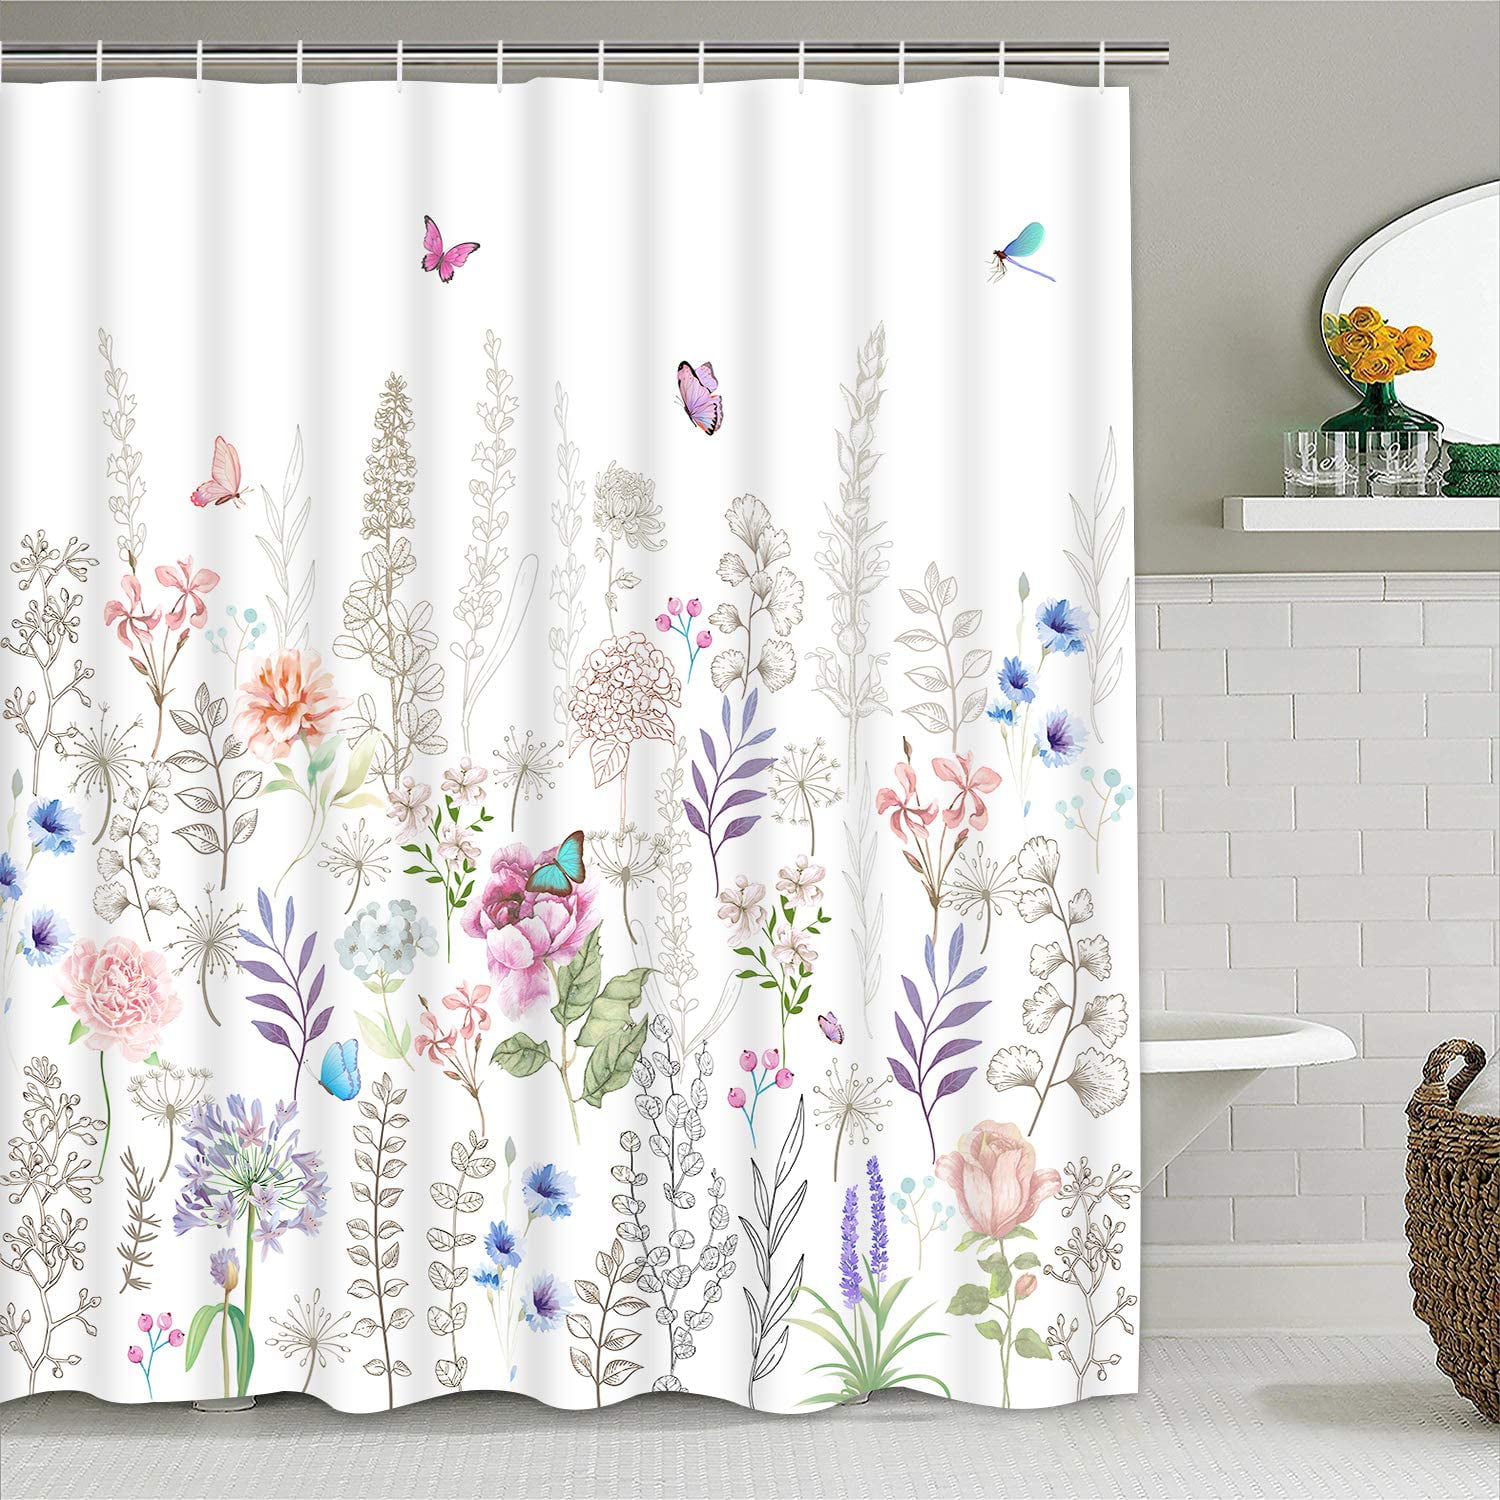 Spring Scene Flowers Butterfly Flying 79" Waterproof Fabric Shower Curtain Liner 